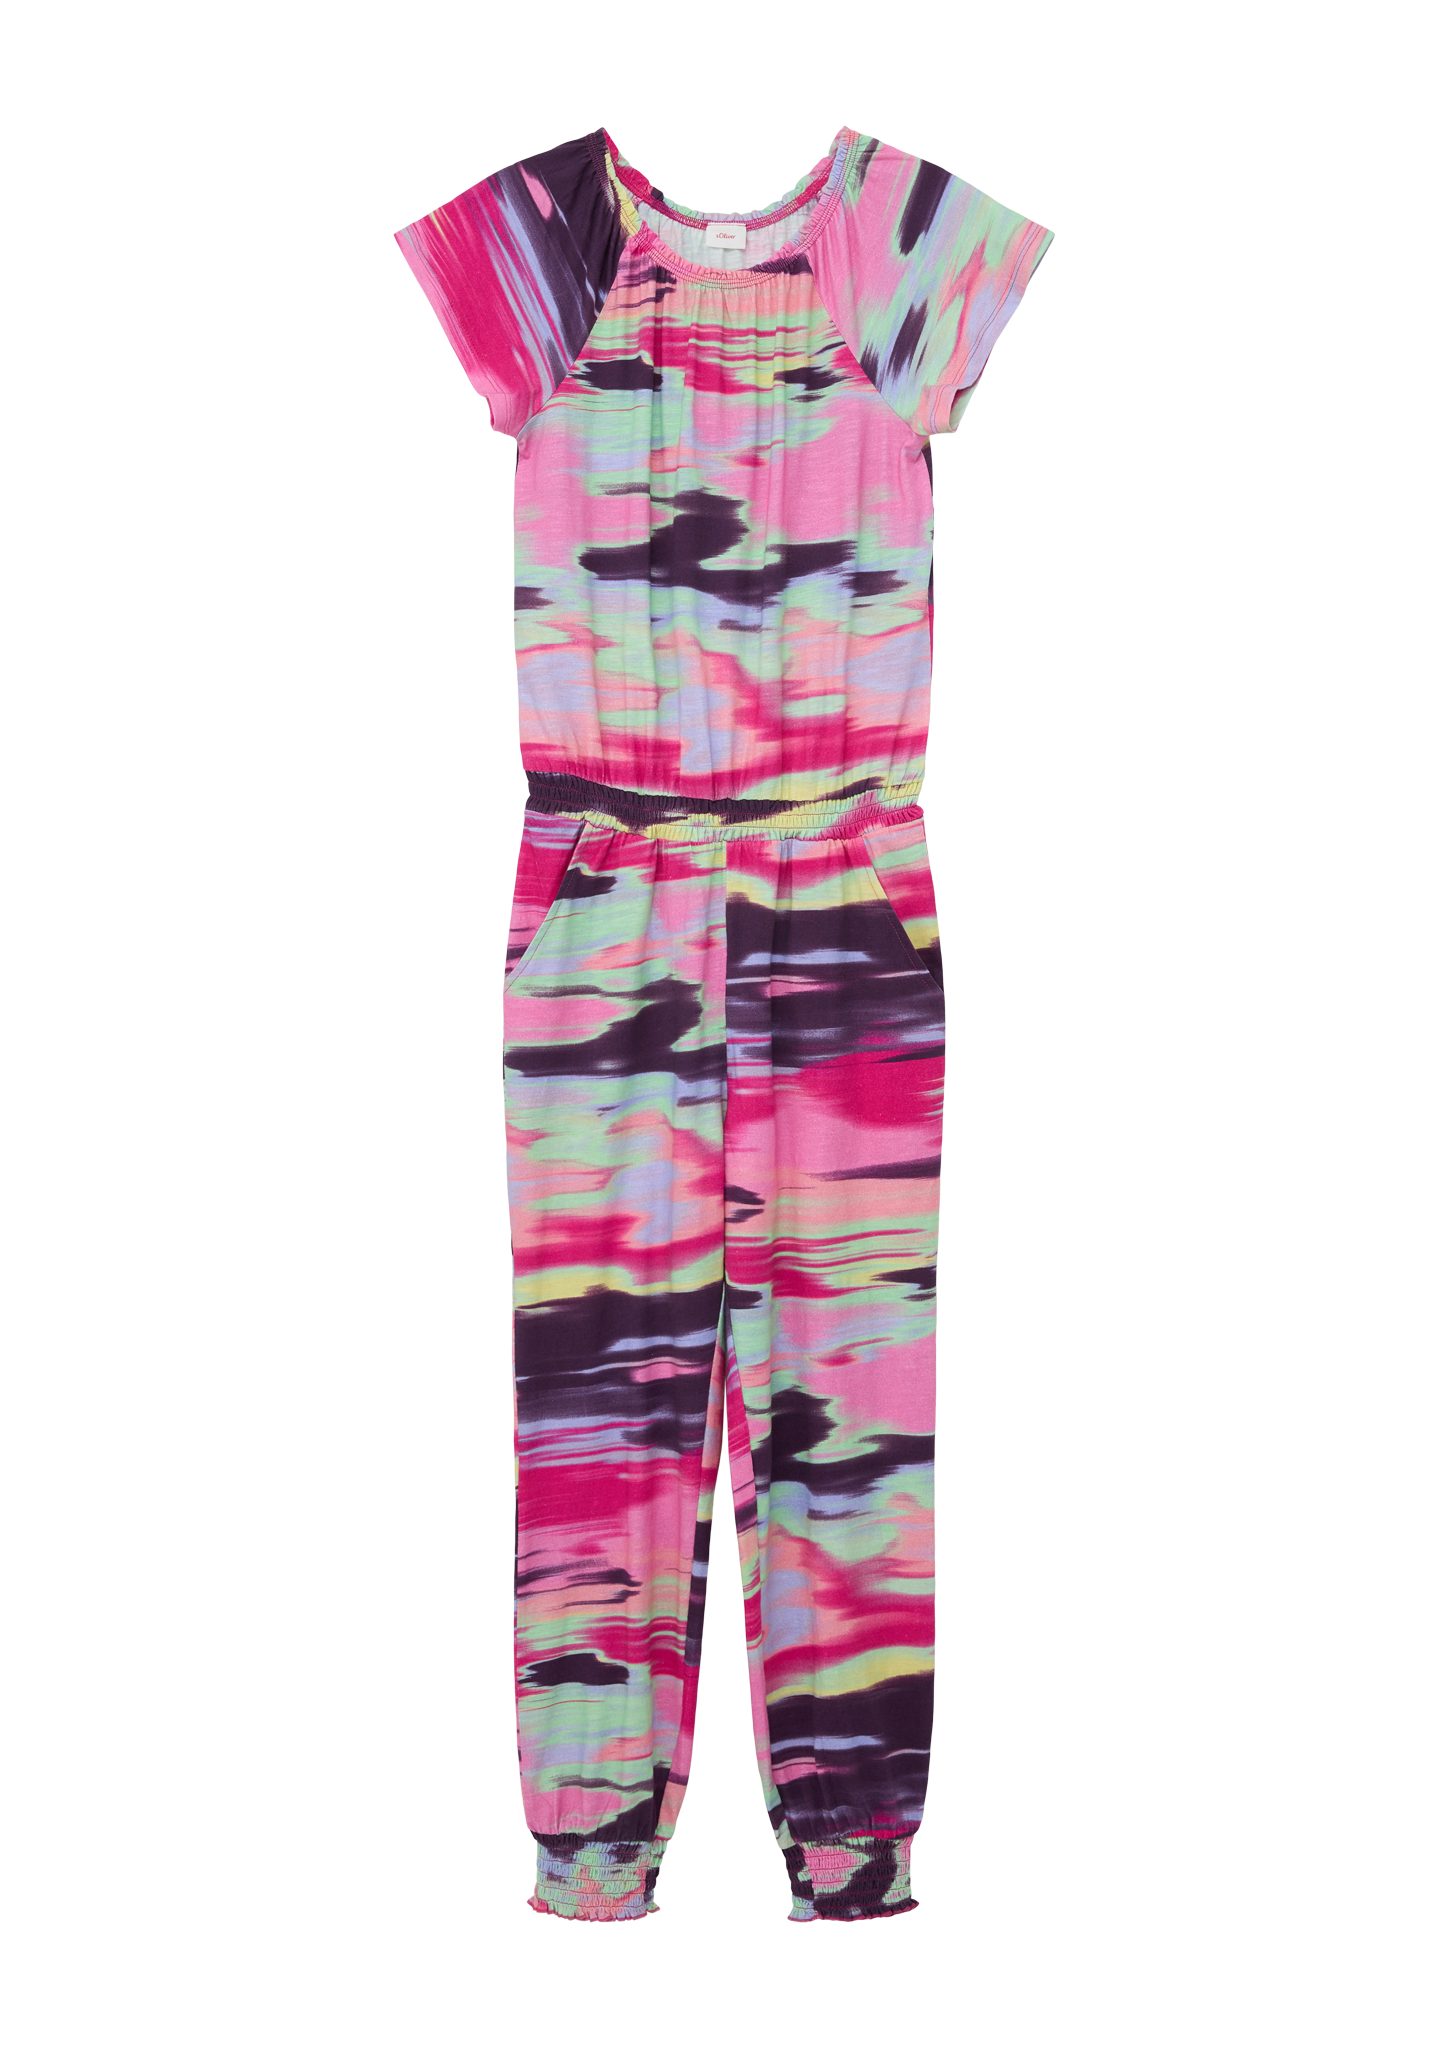 Smok-Detail mit Overall abstraktem Print s.Oliver Overall